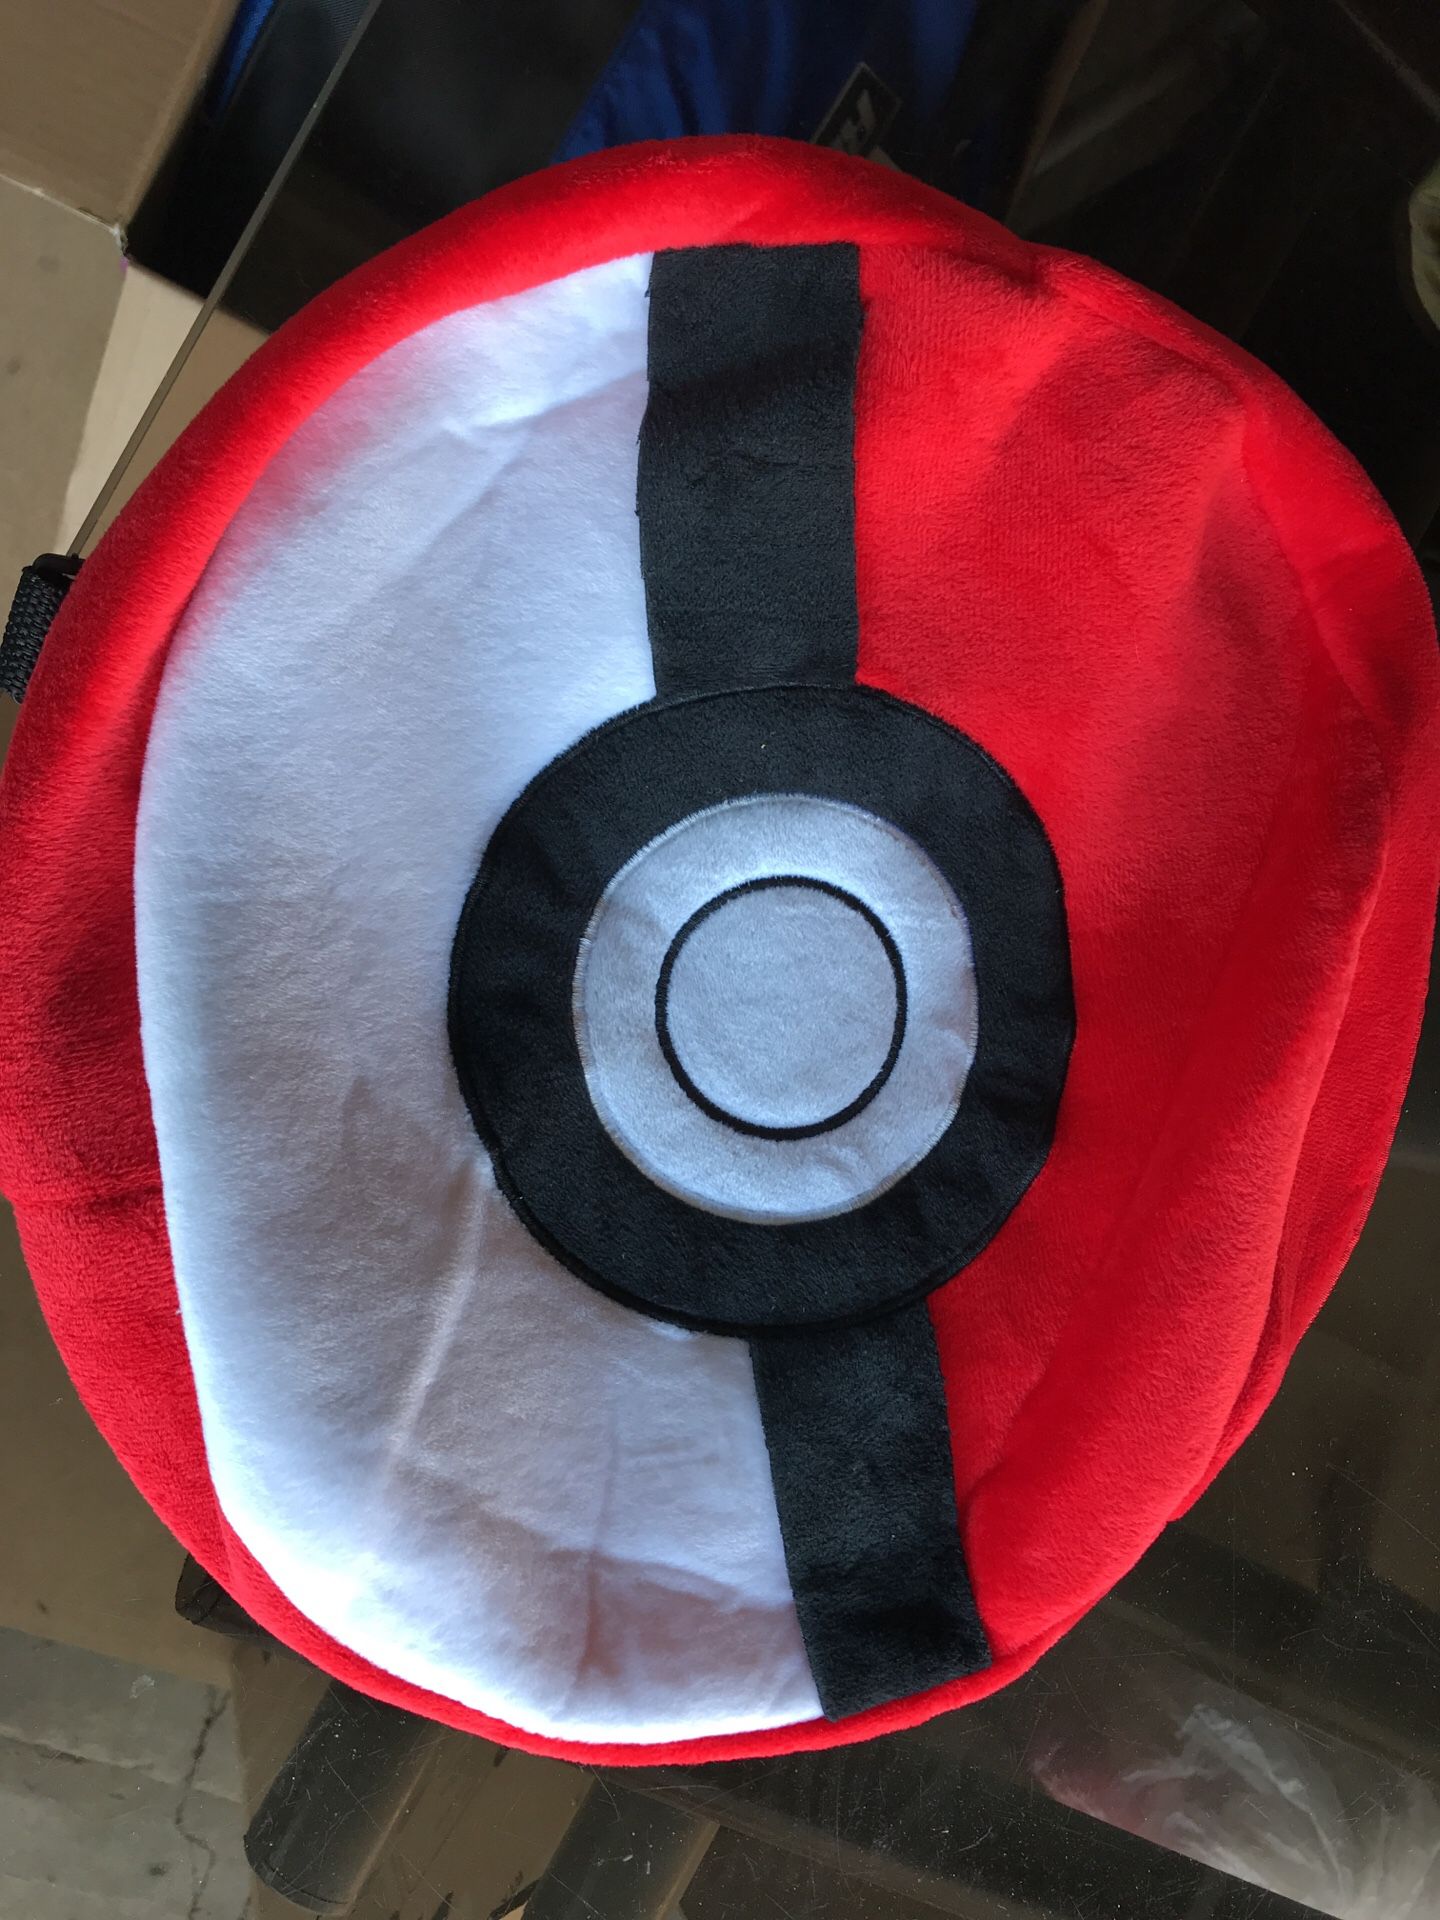 Pokemon Ball Backpack. New without tag